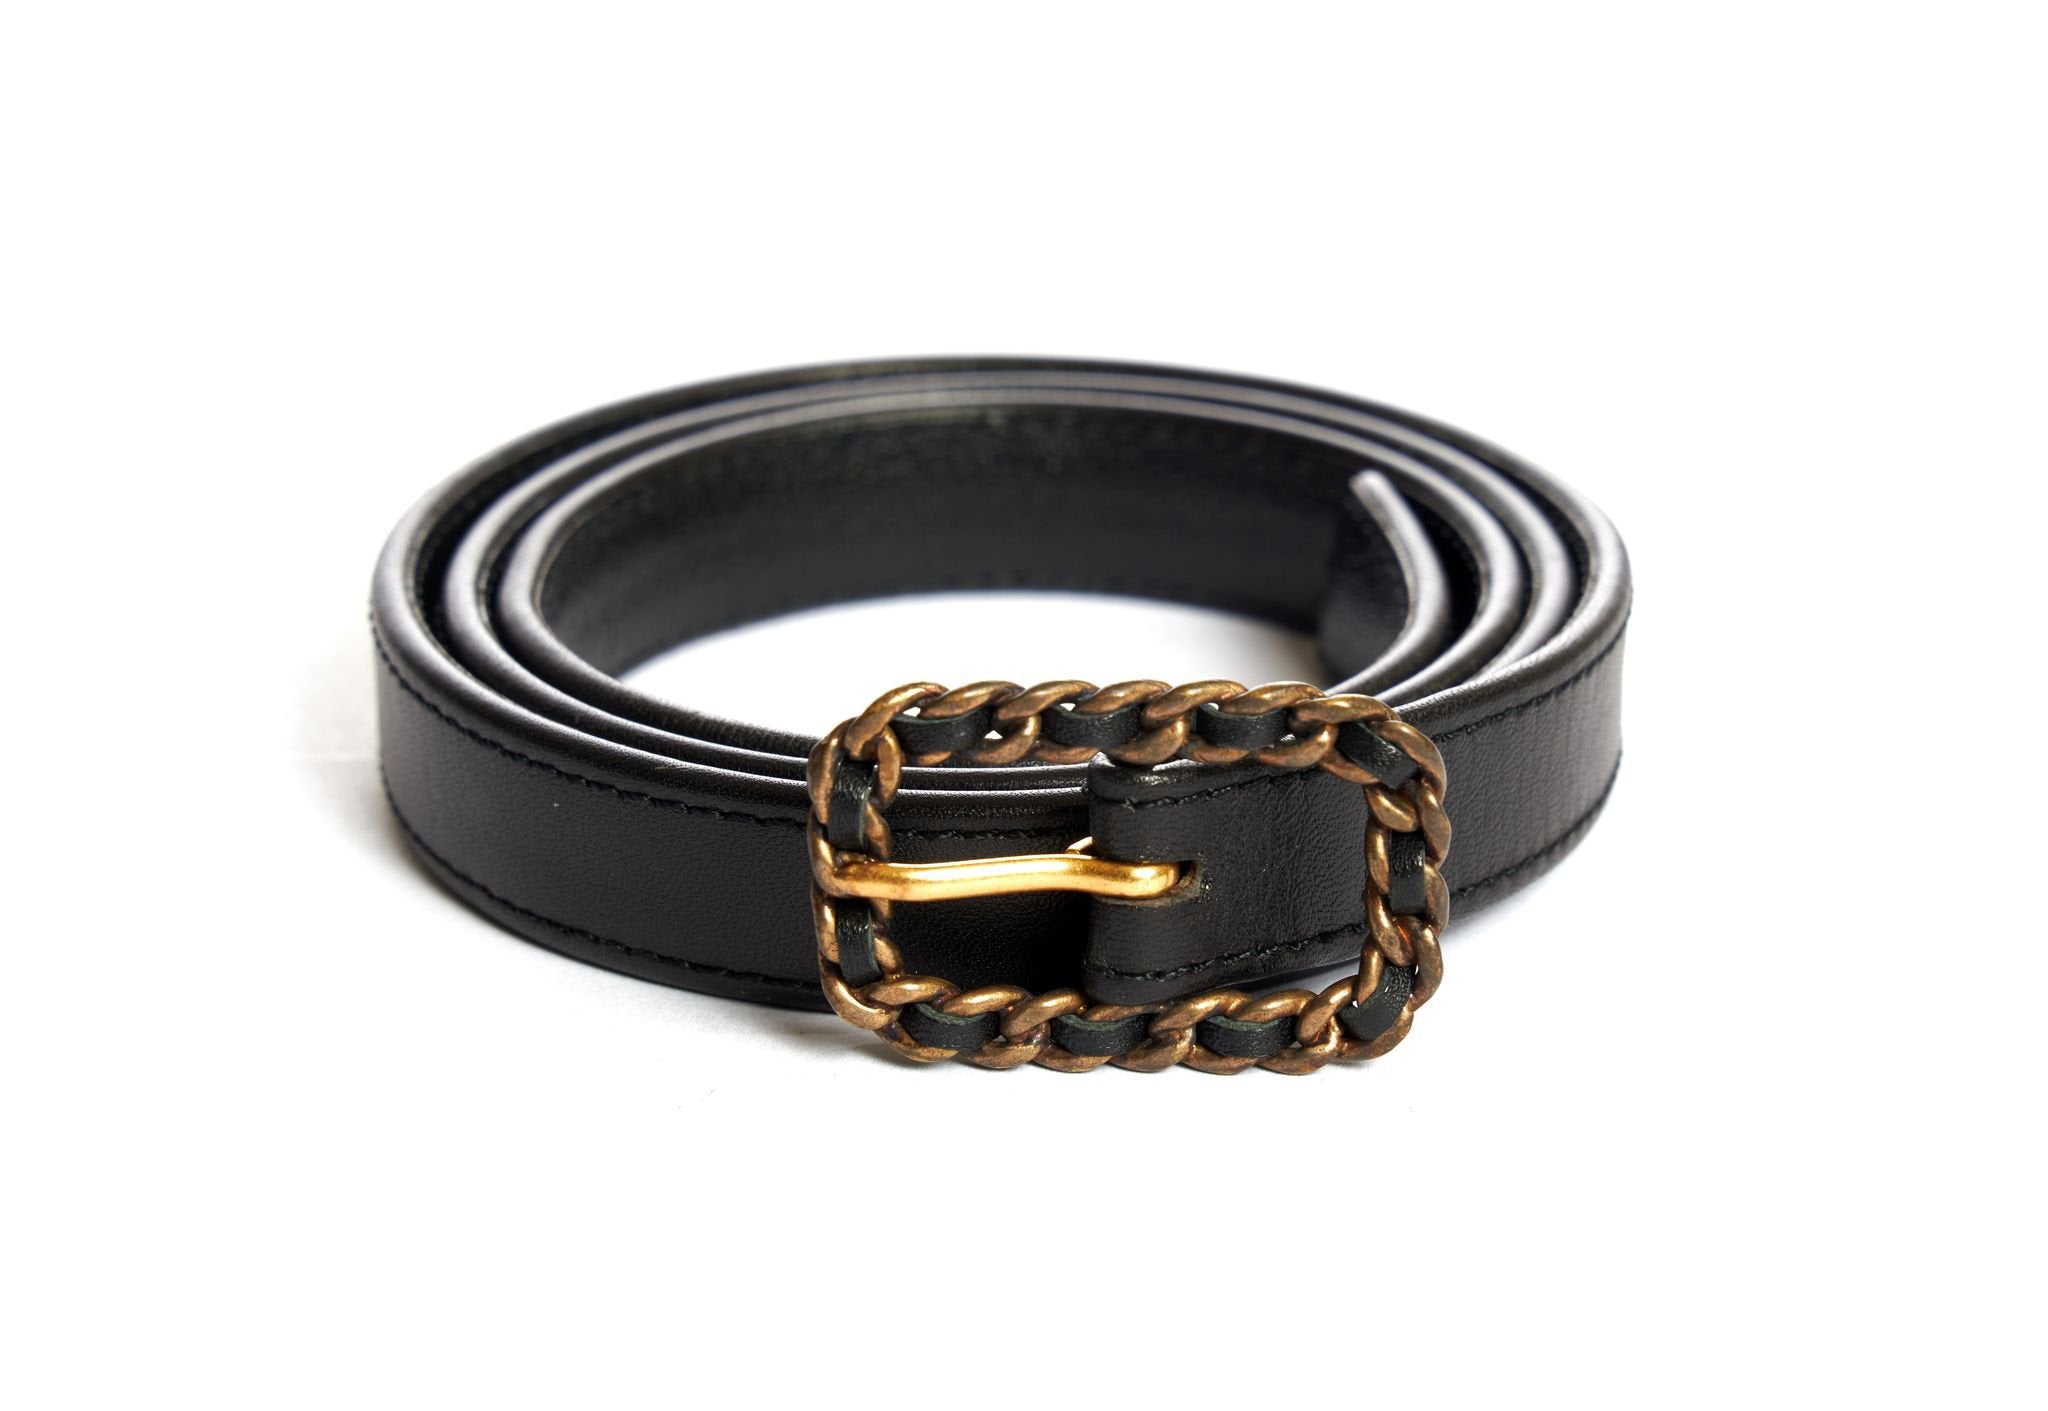 Chanel Thin Black Belt With Chain Buckle - Vintage Lux